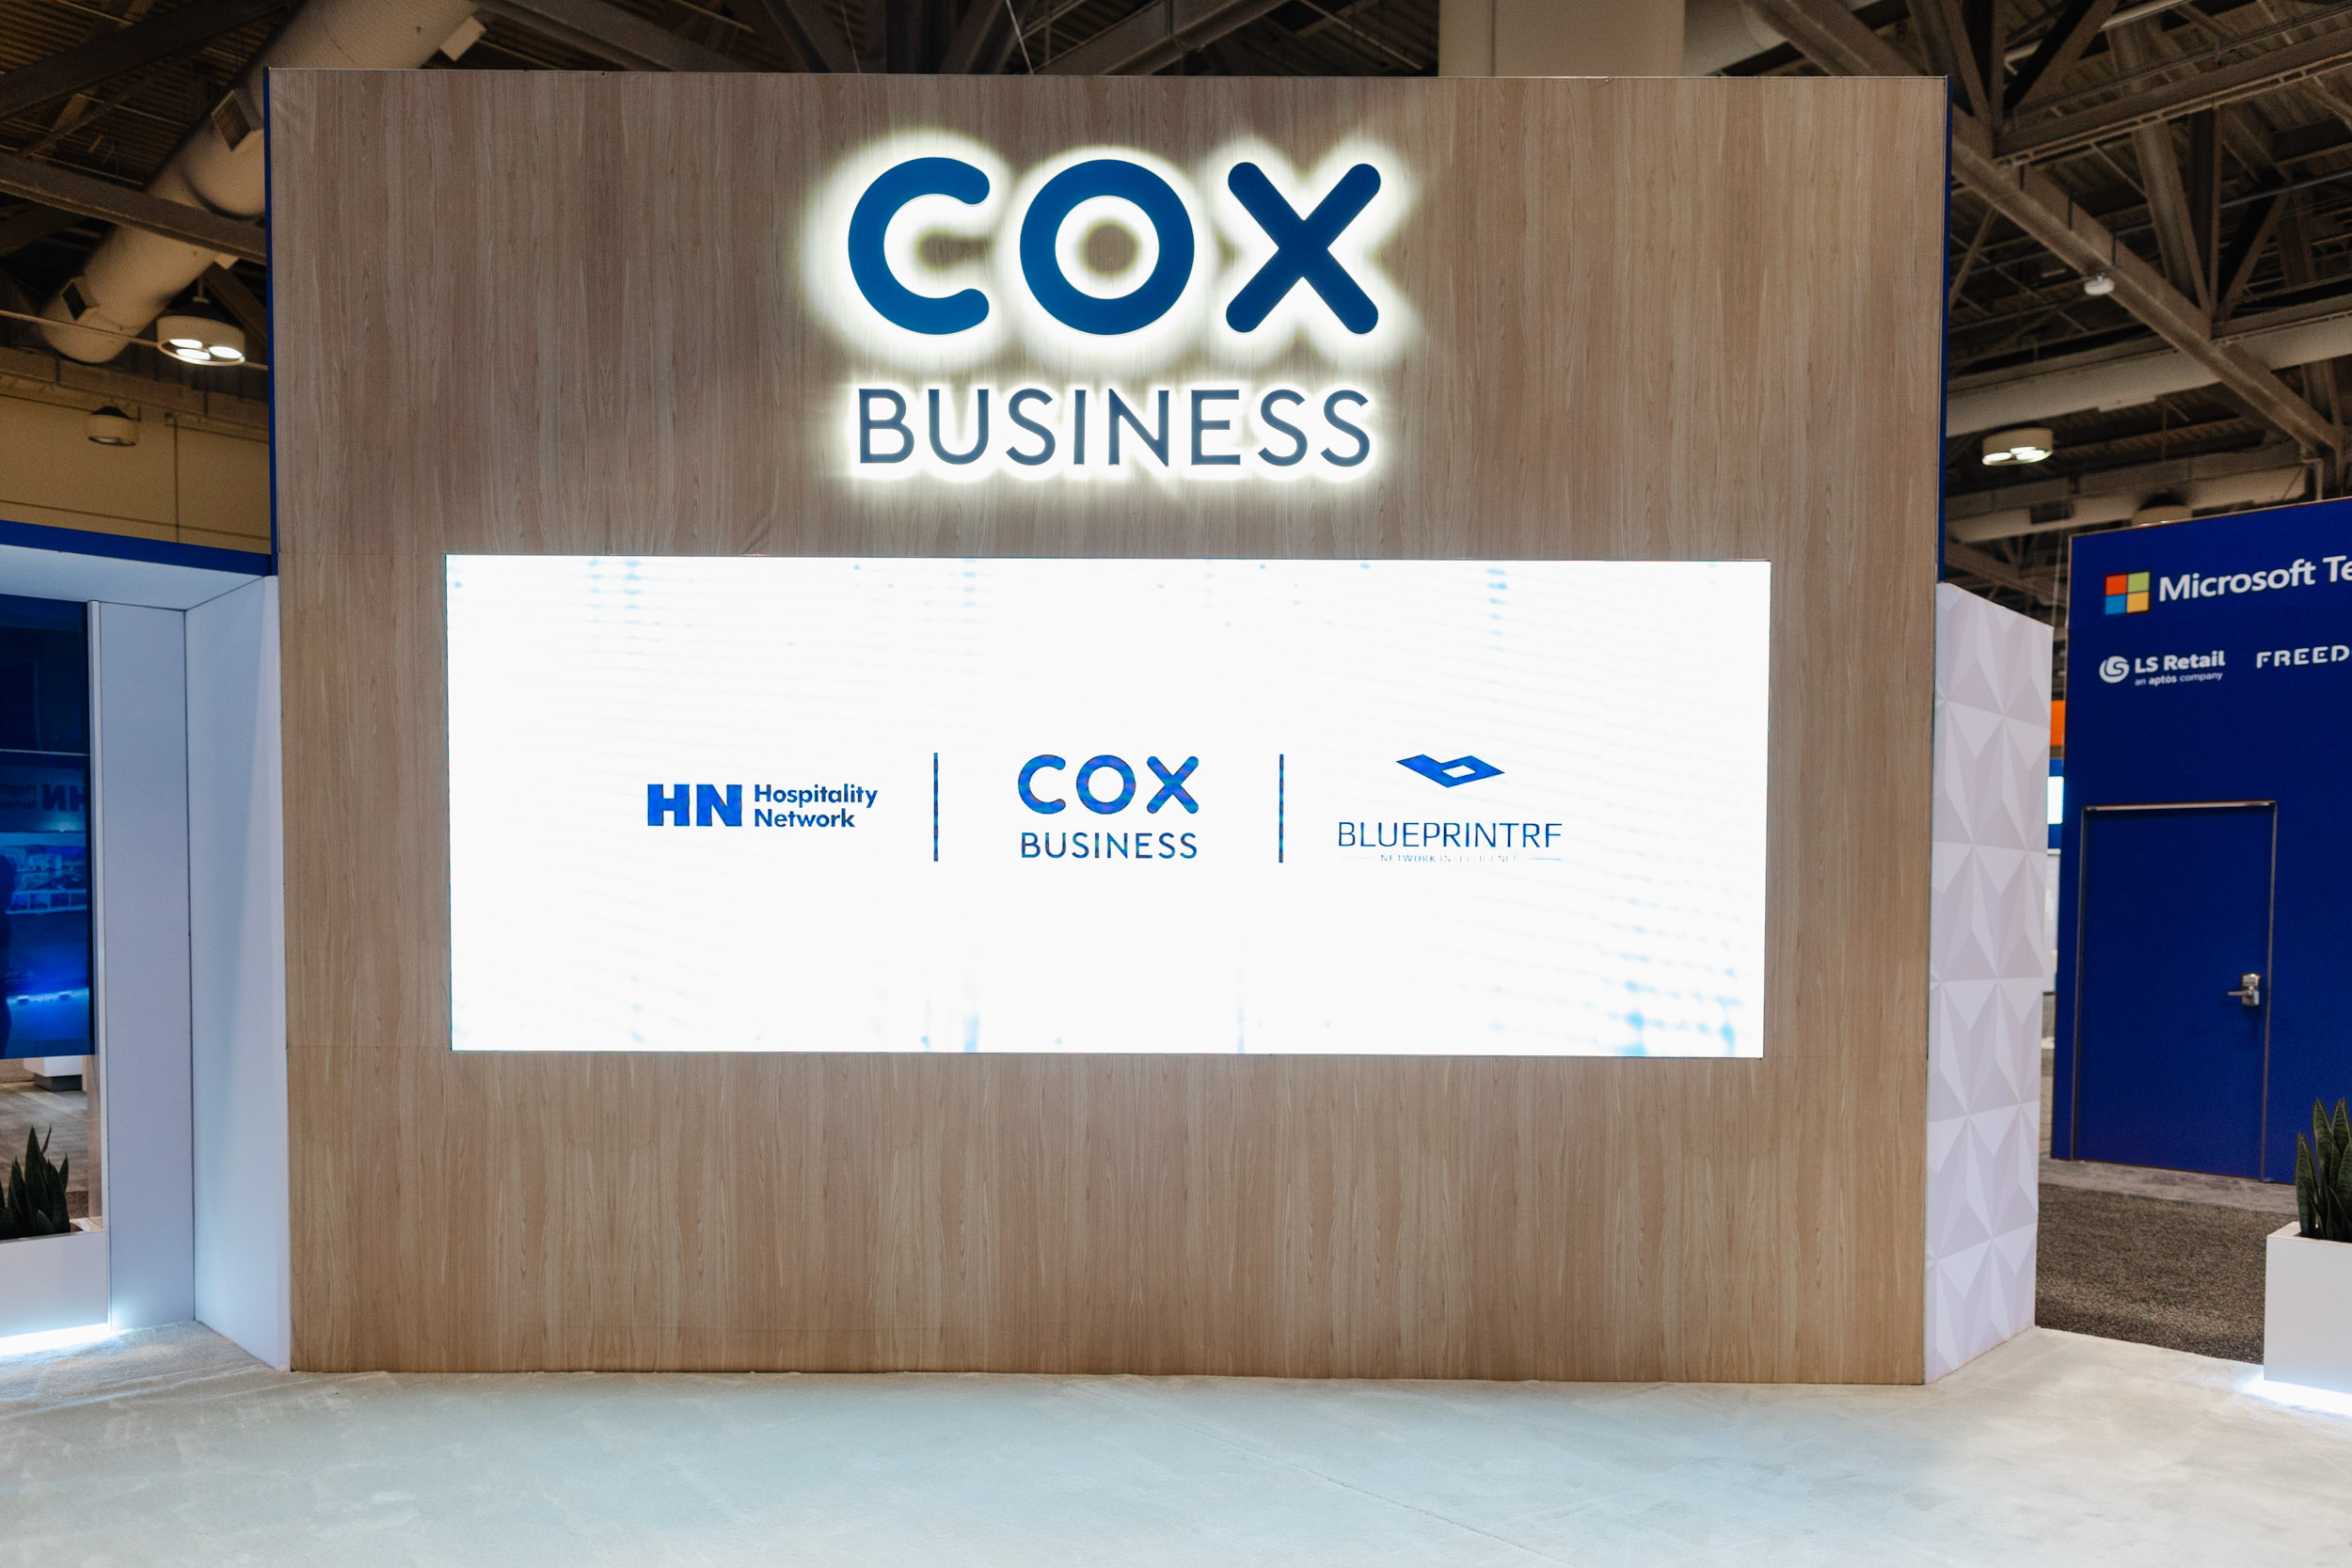 Cox business booth at the Toronto trade show.